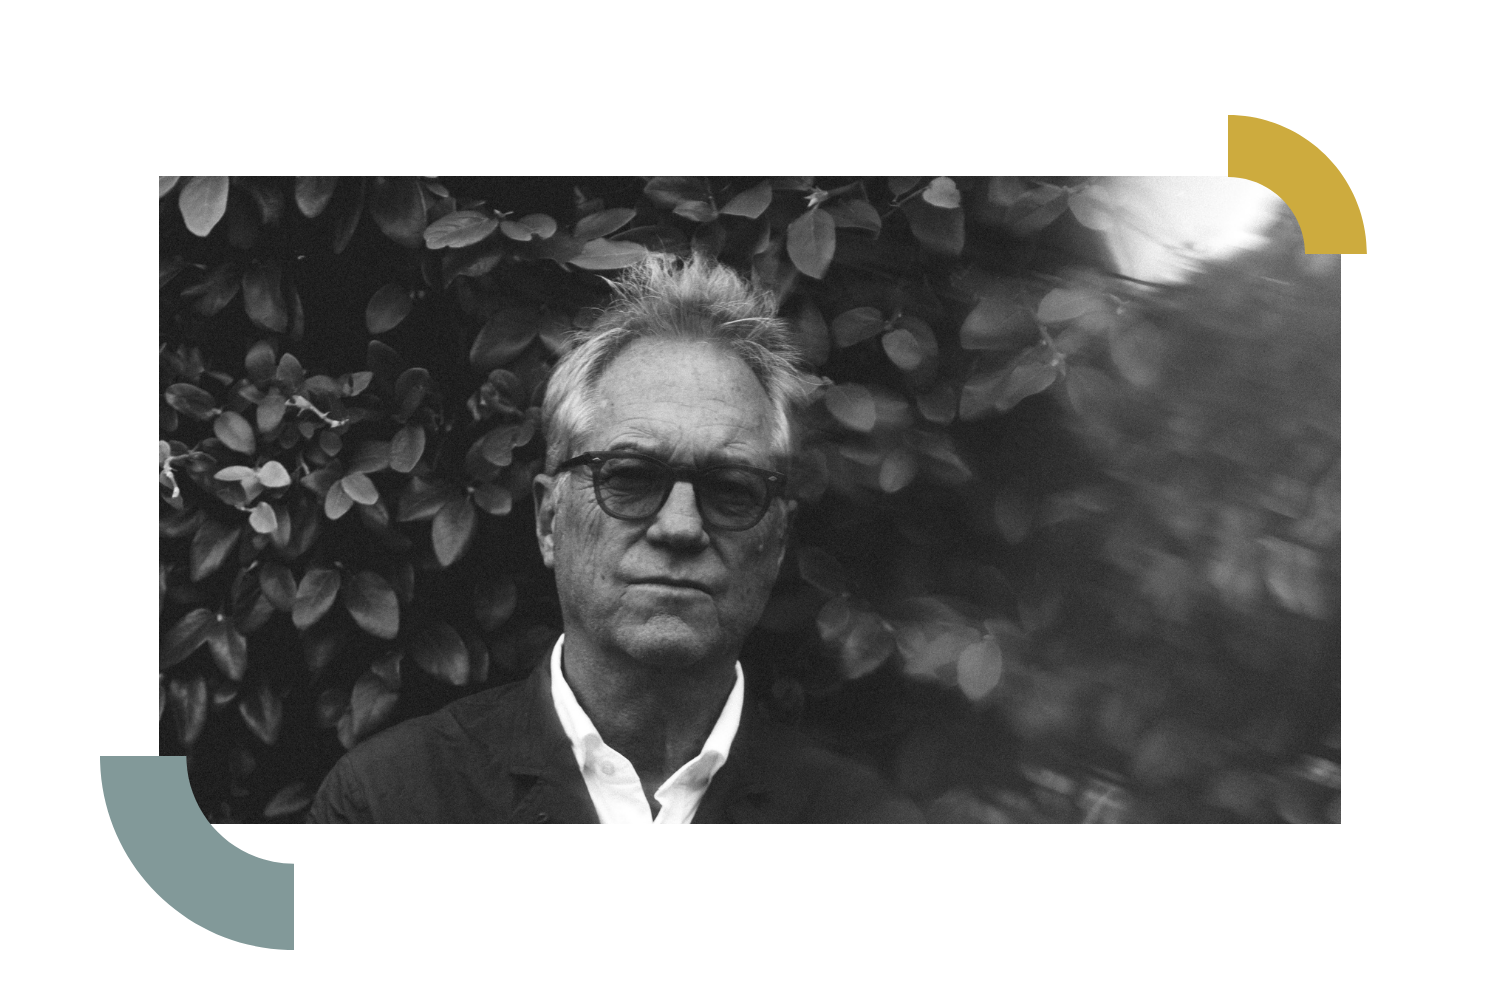 Keeping The Light On – The Best Of Gerry Beckley Is Out Today